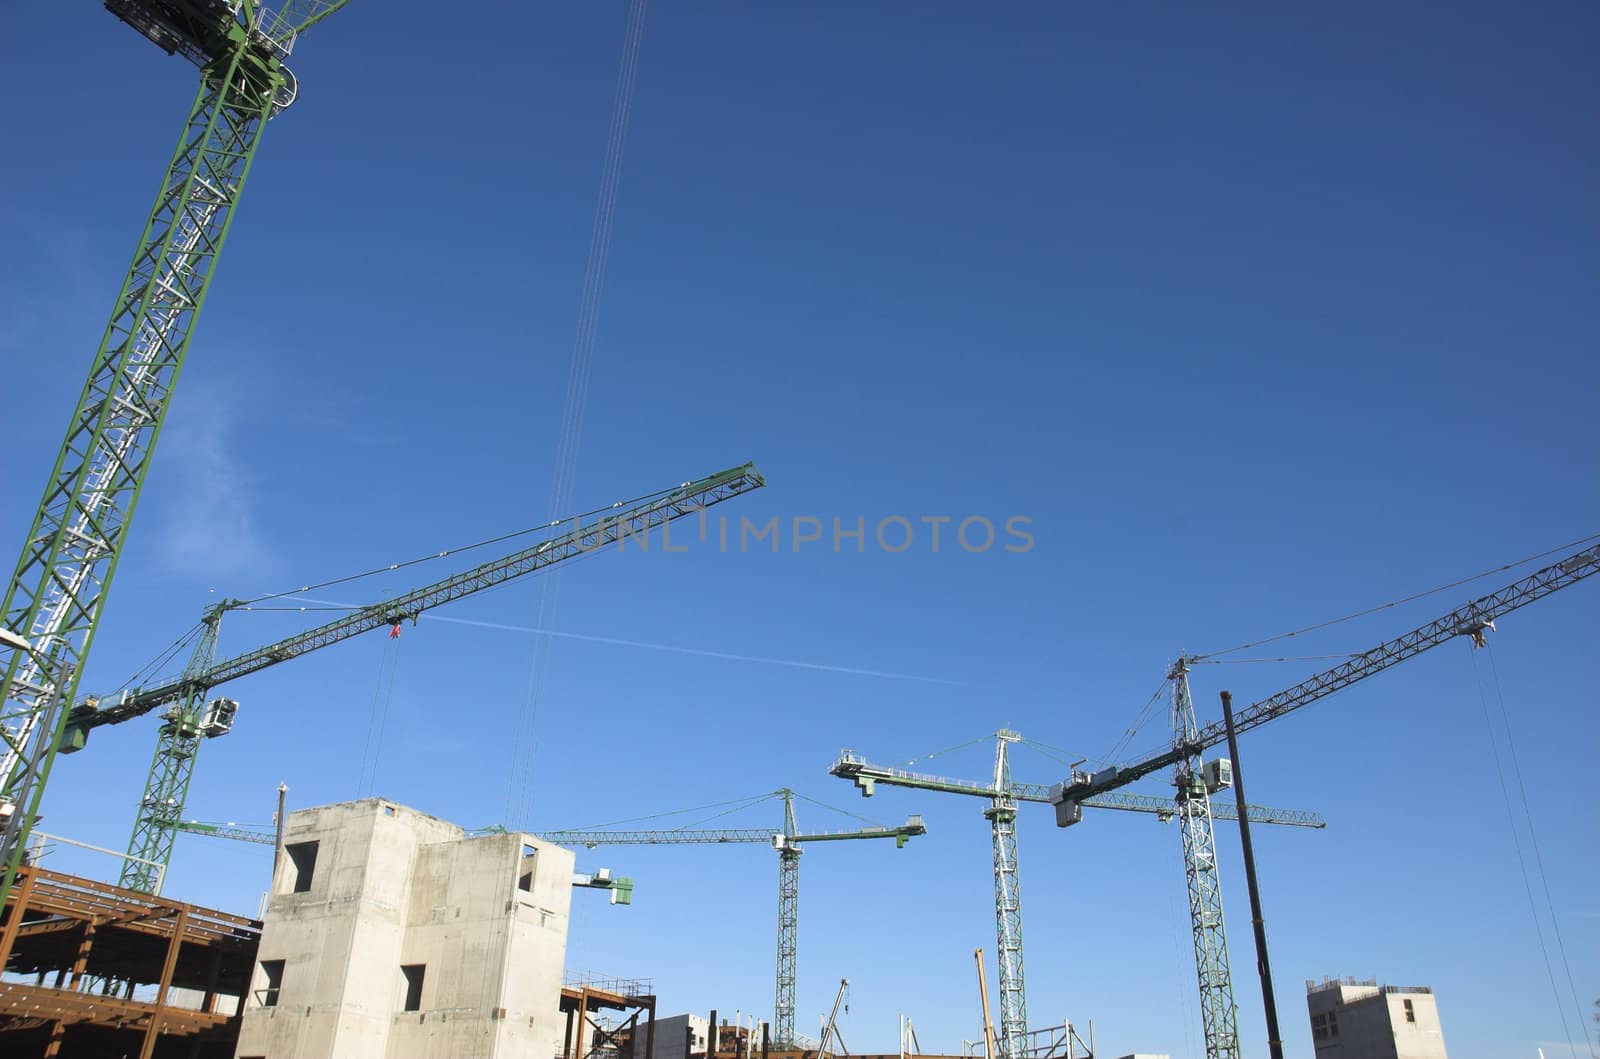 Large scale construction site with construction cranes filling the sky.